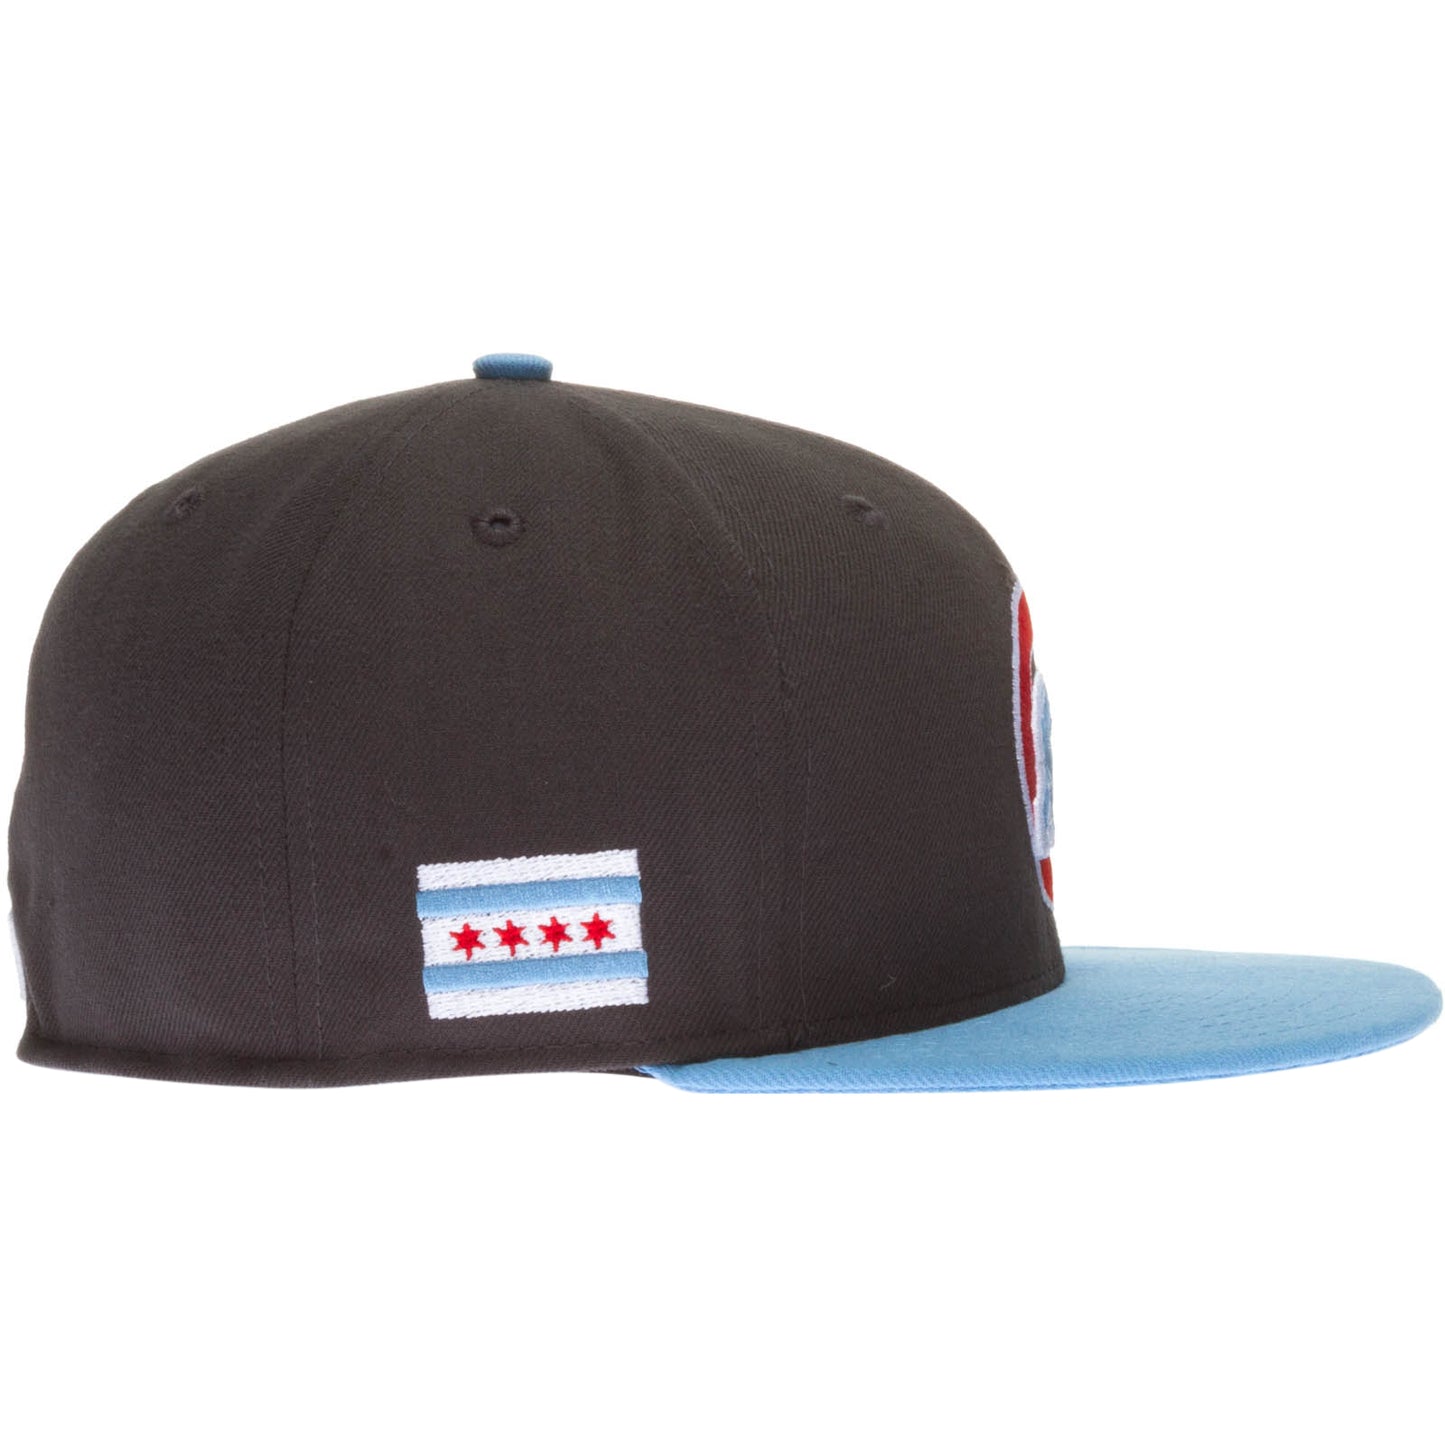 Chicago Cubs Graphite and Sky Blue New Era 59FIFTY Fitted Hat